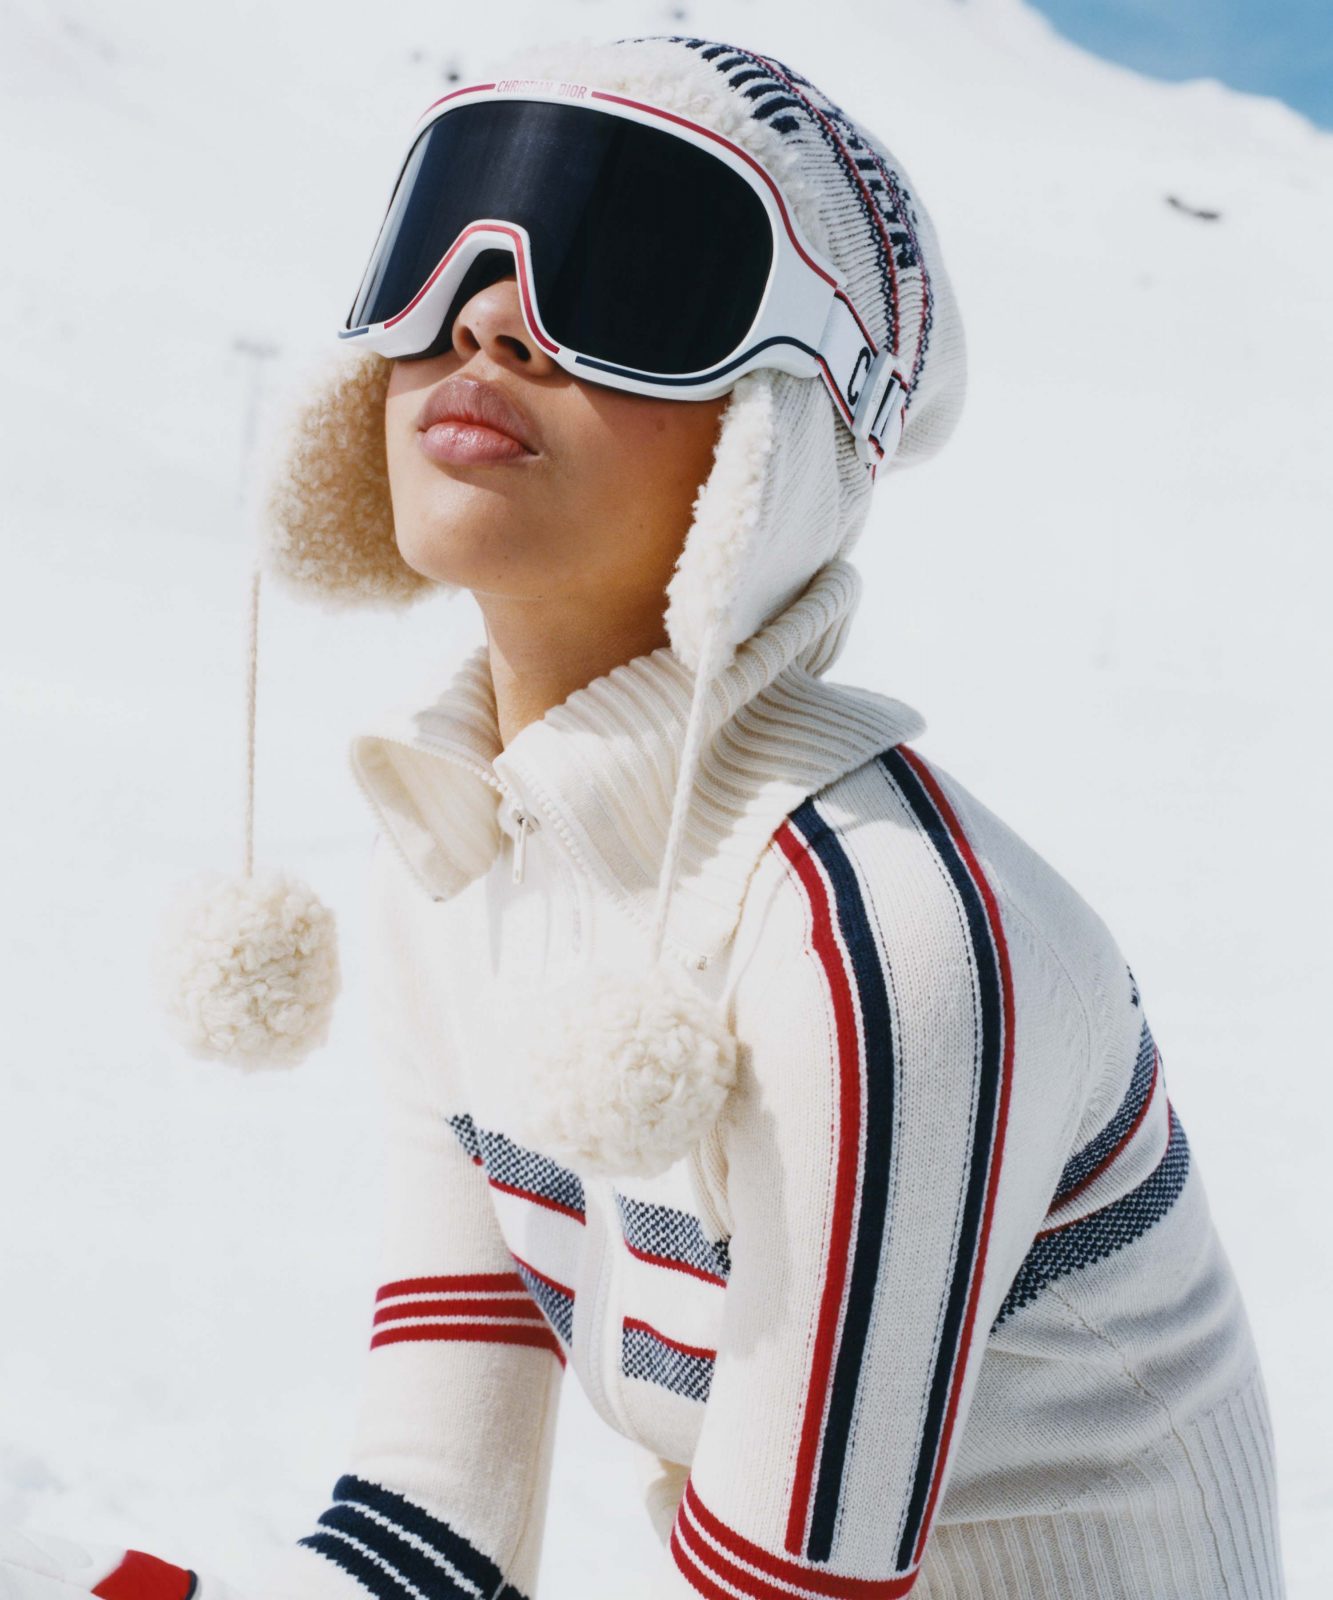 The Best 2022 Apres Ski Outfit Trends - The Charming Detroiter